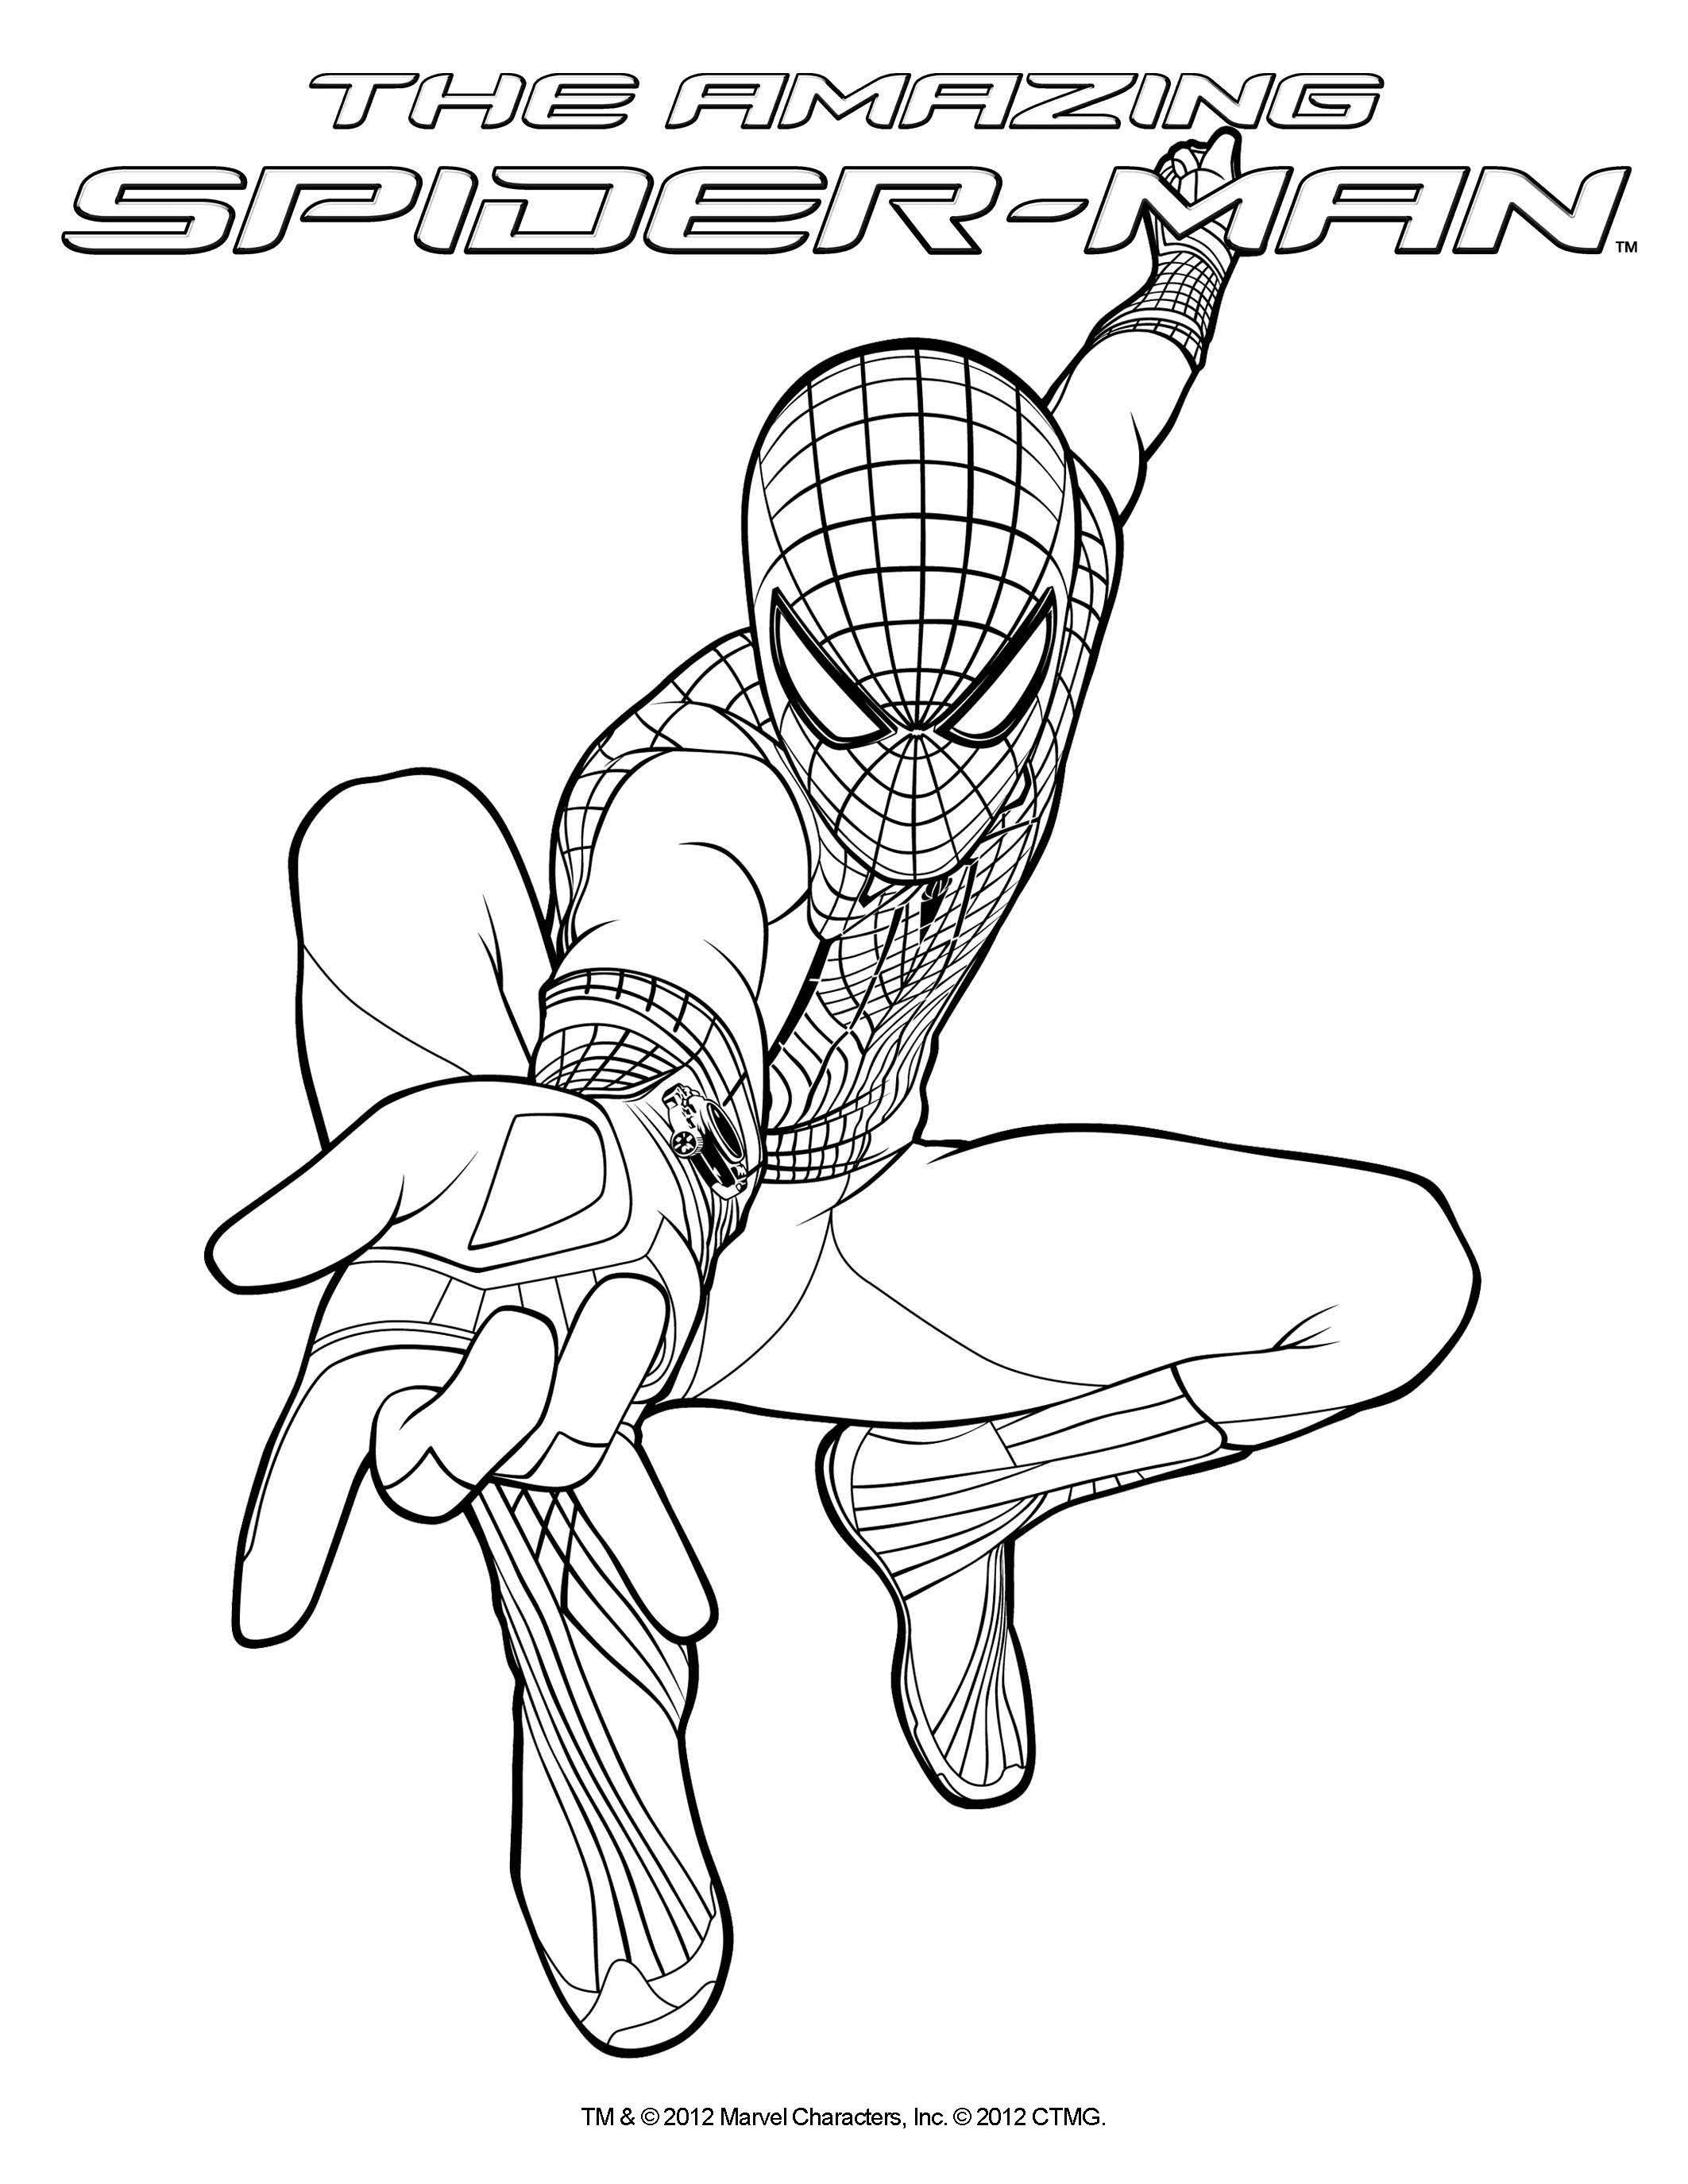 Coloring Sheets For Boys Spiderman
 Coloring sheet THE AMAZING SPIDER MAN in theatres July 3